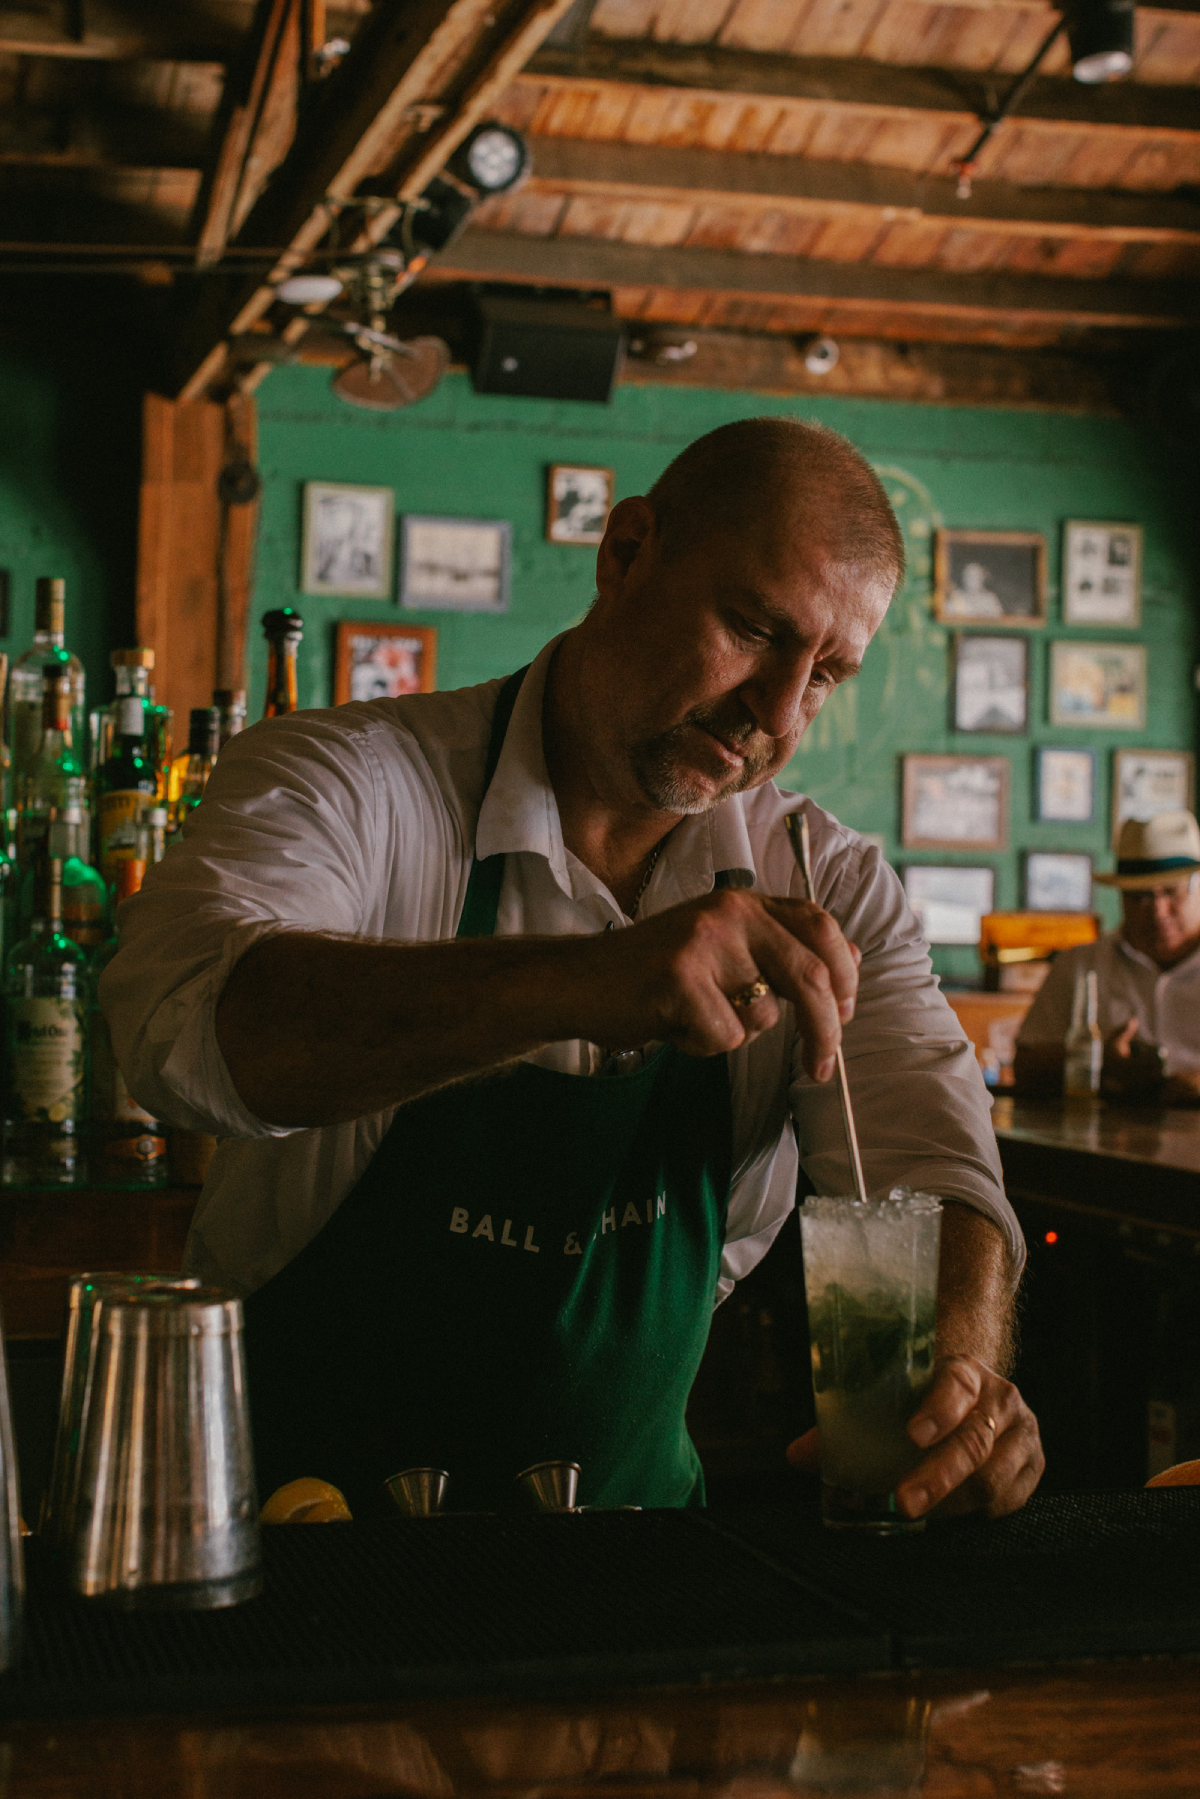 A color photo by James Jackman of a man mixing a Mojito at Ball & Chain in Little Havana, Miami.